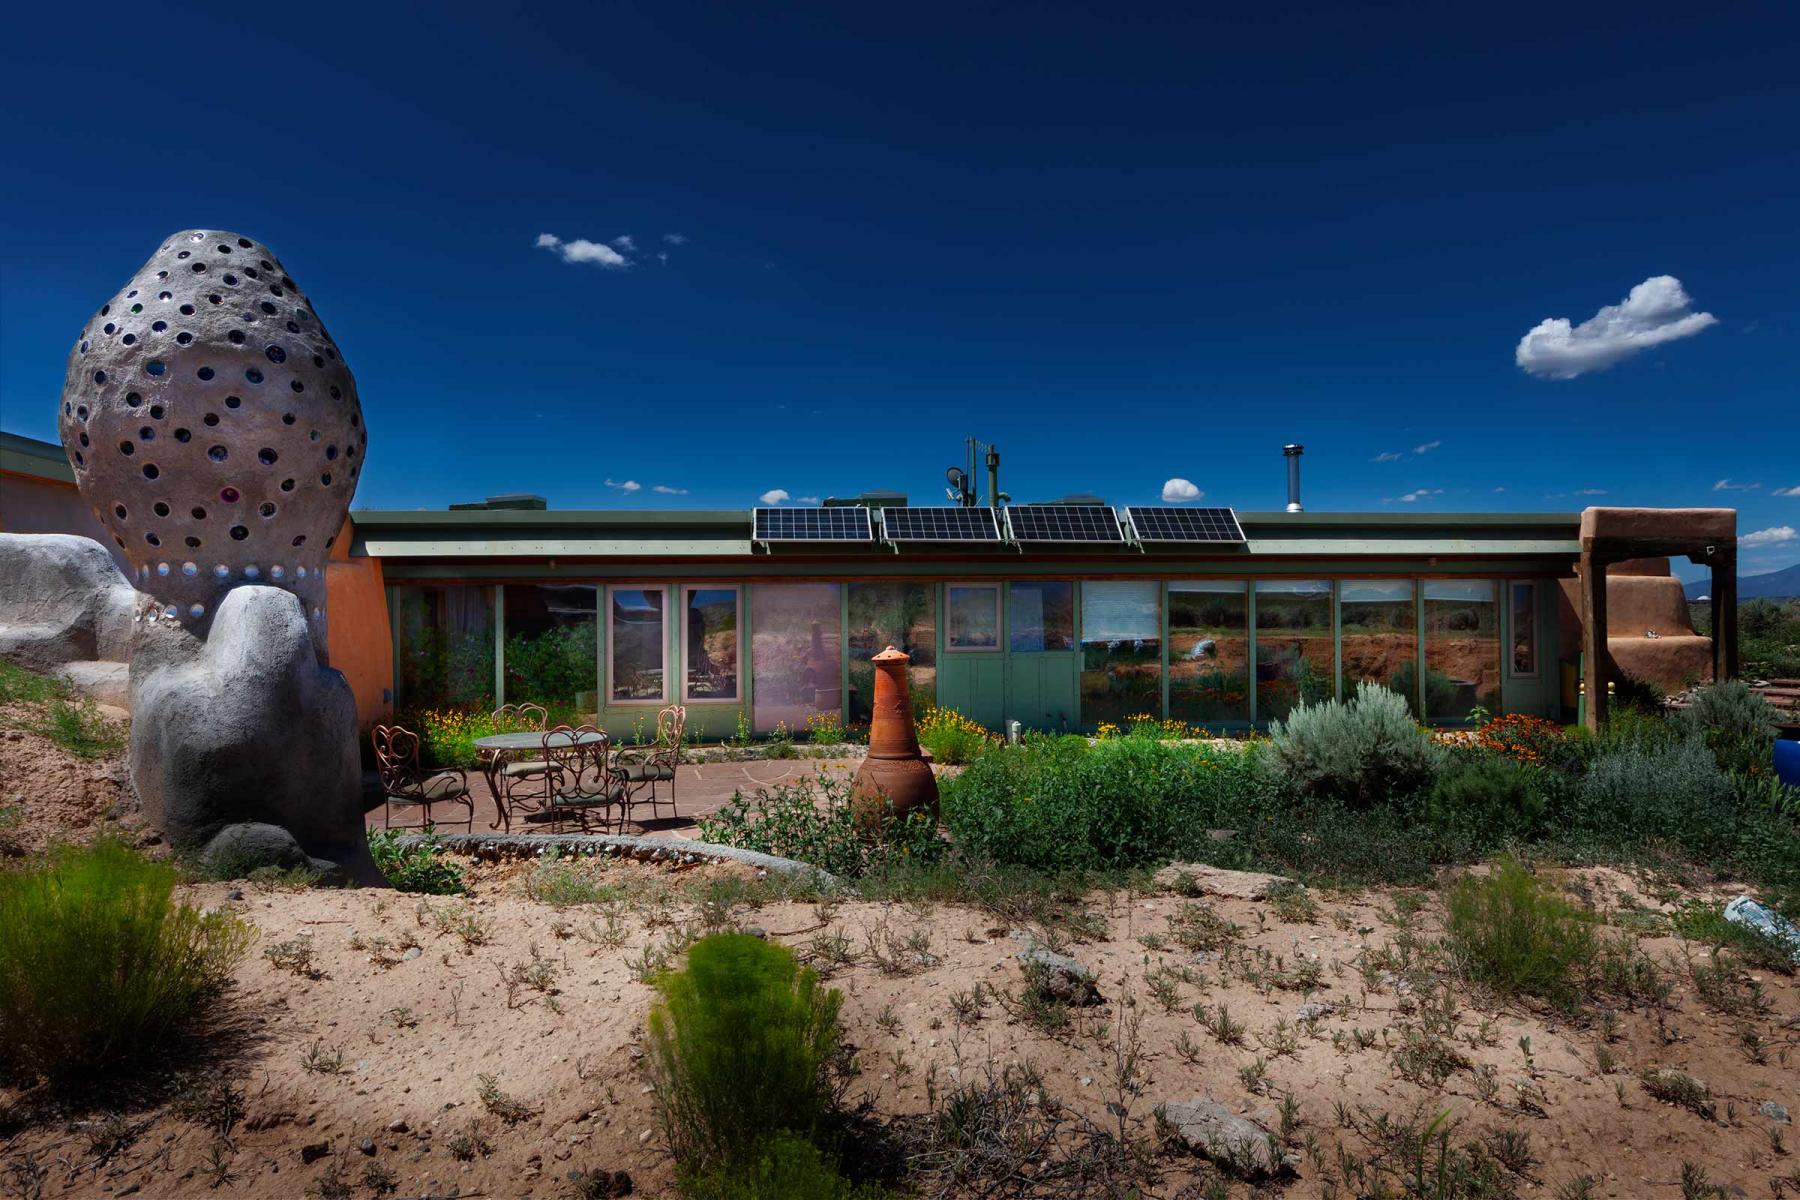  : Earthship New Mexico : New York NY Architectural Photographer | Interior and Exterior